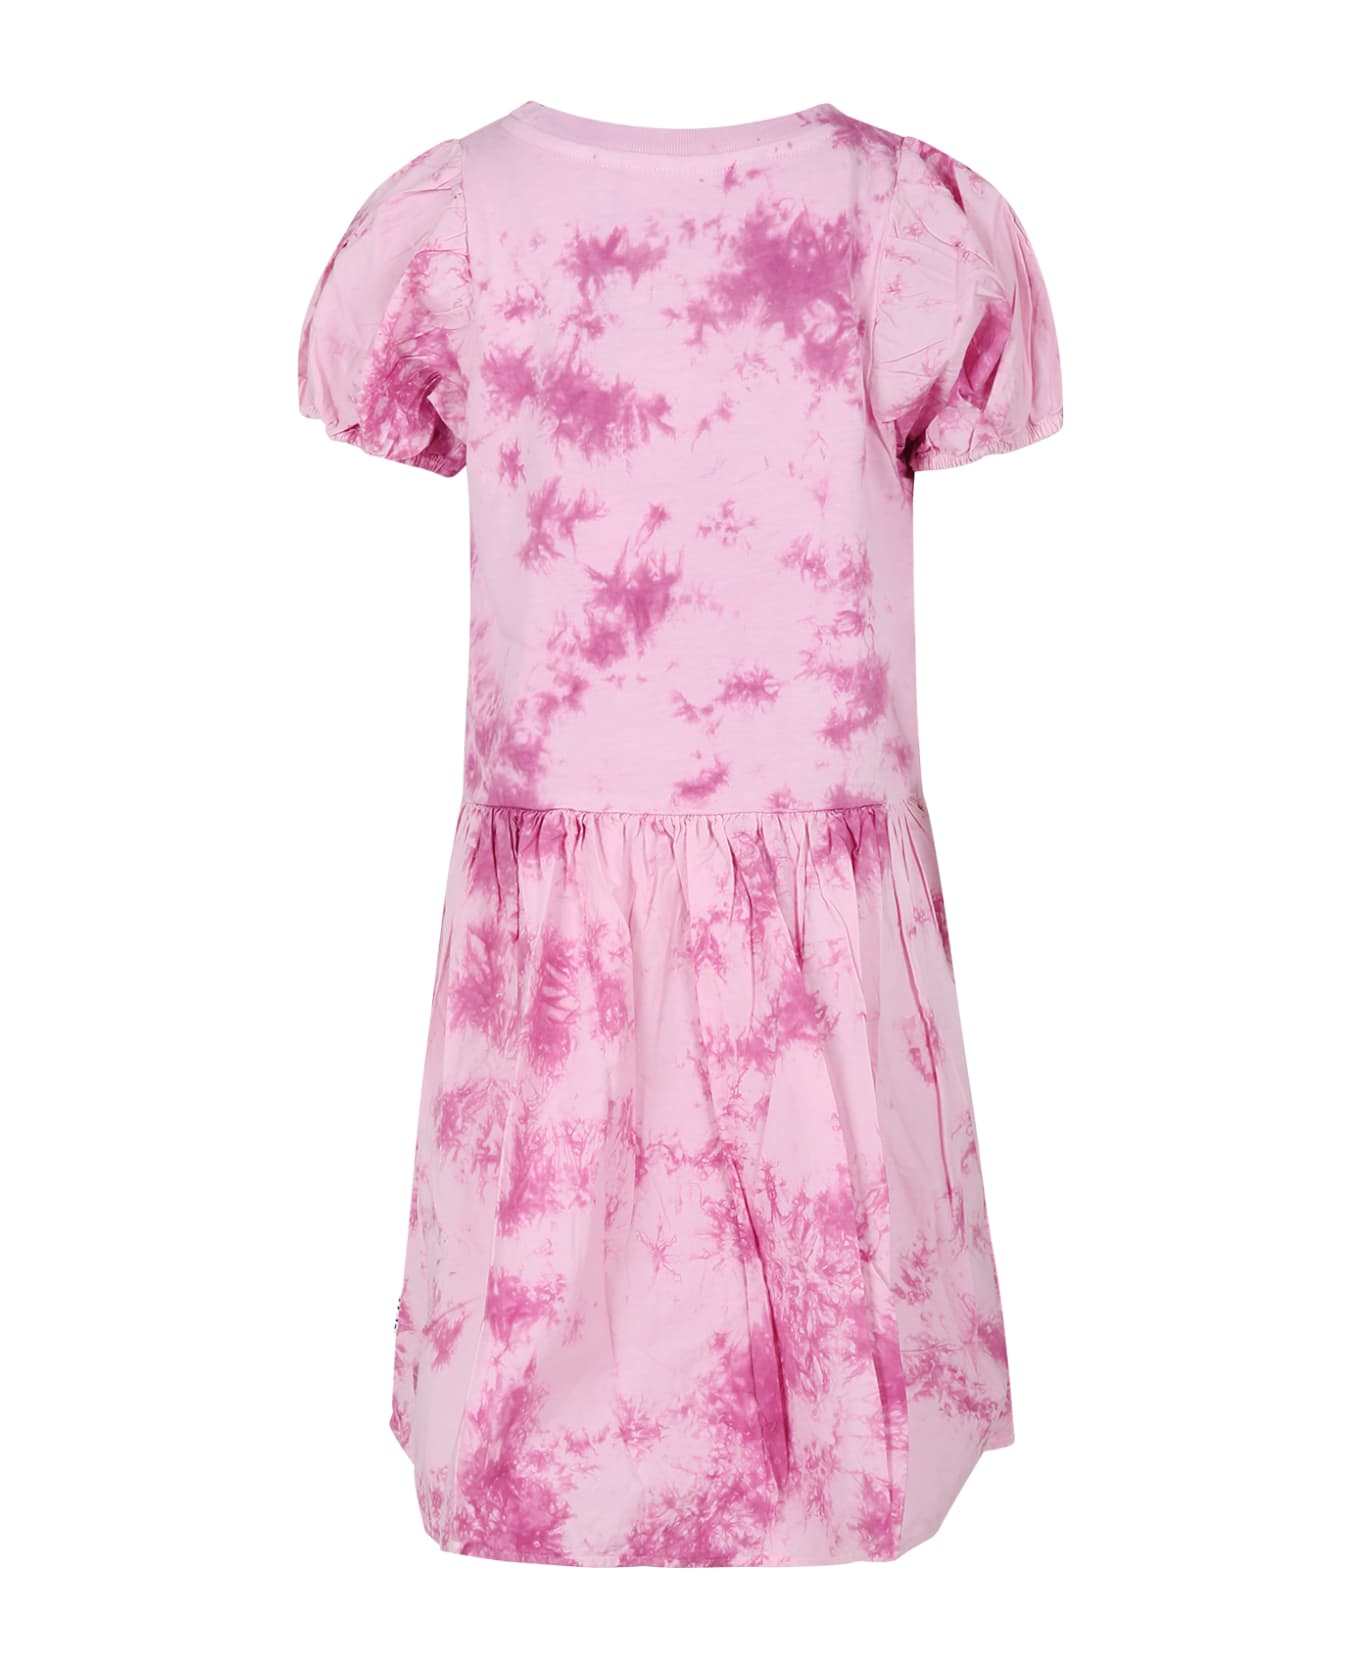 Molo Casual Pink Dress Chikako For Girl - Pink